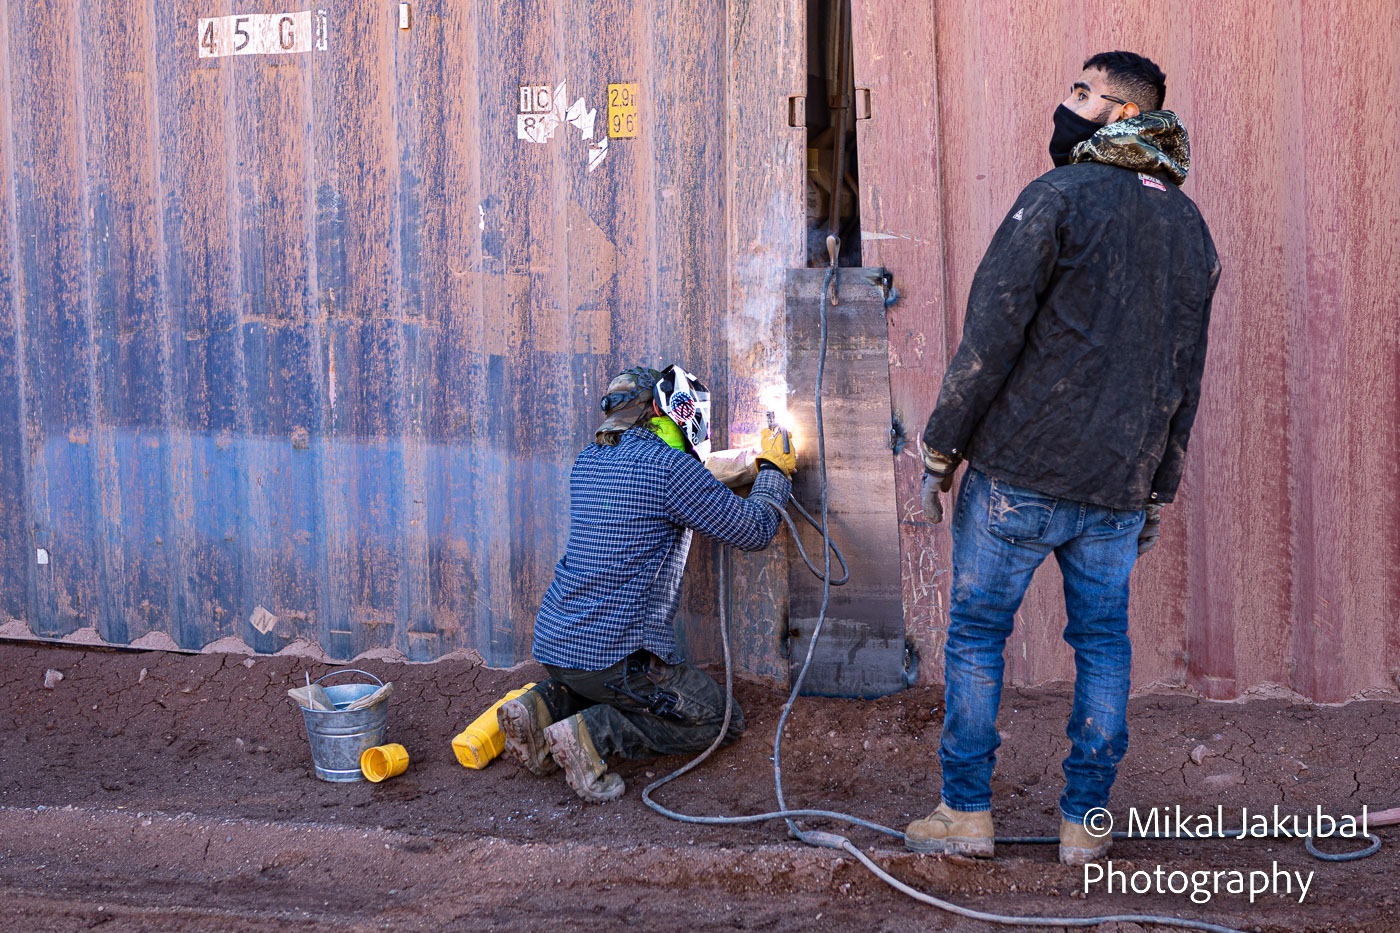 One worker in a welding helmet tack welds a steel plate to cover the gap between two shipping containers while a second worker looks away from the bright welding arc.